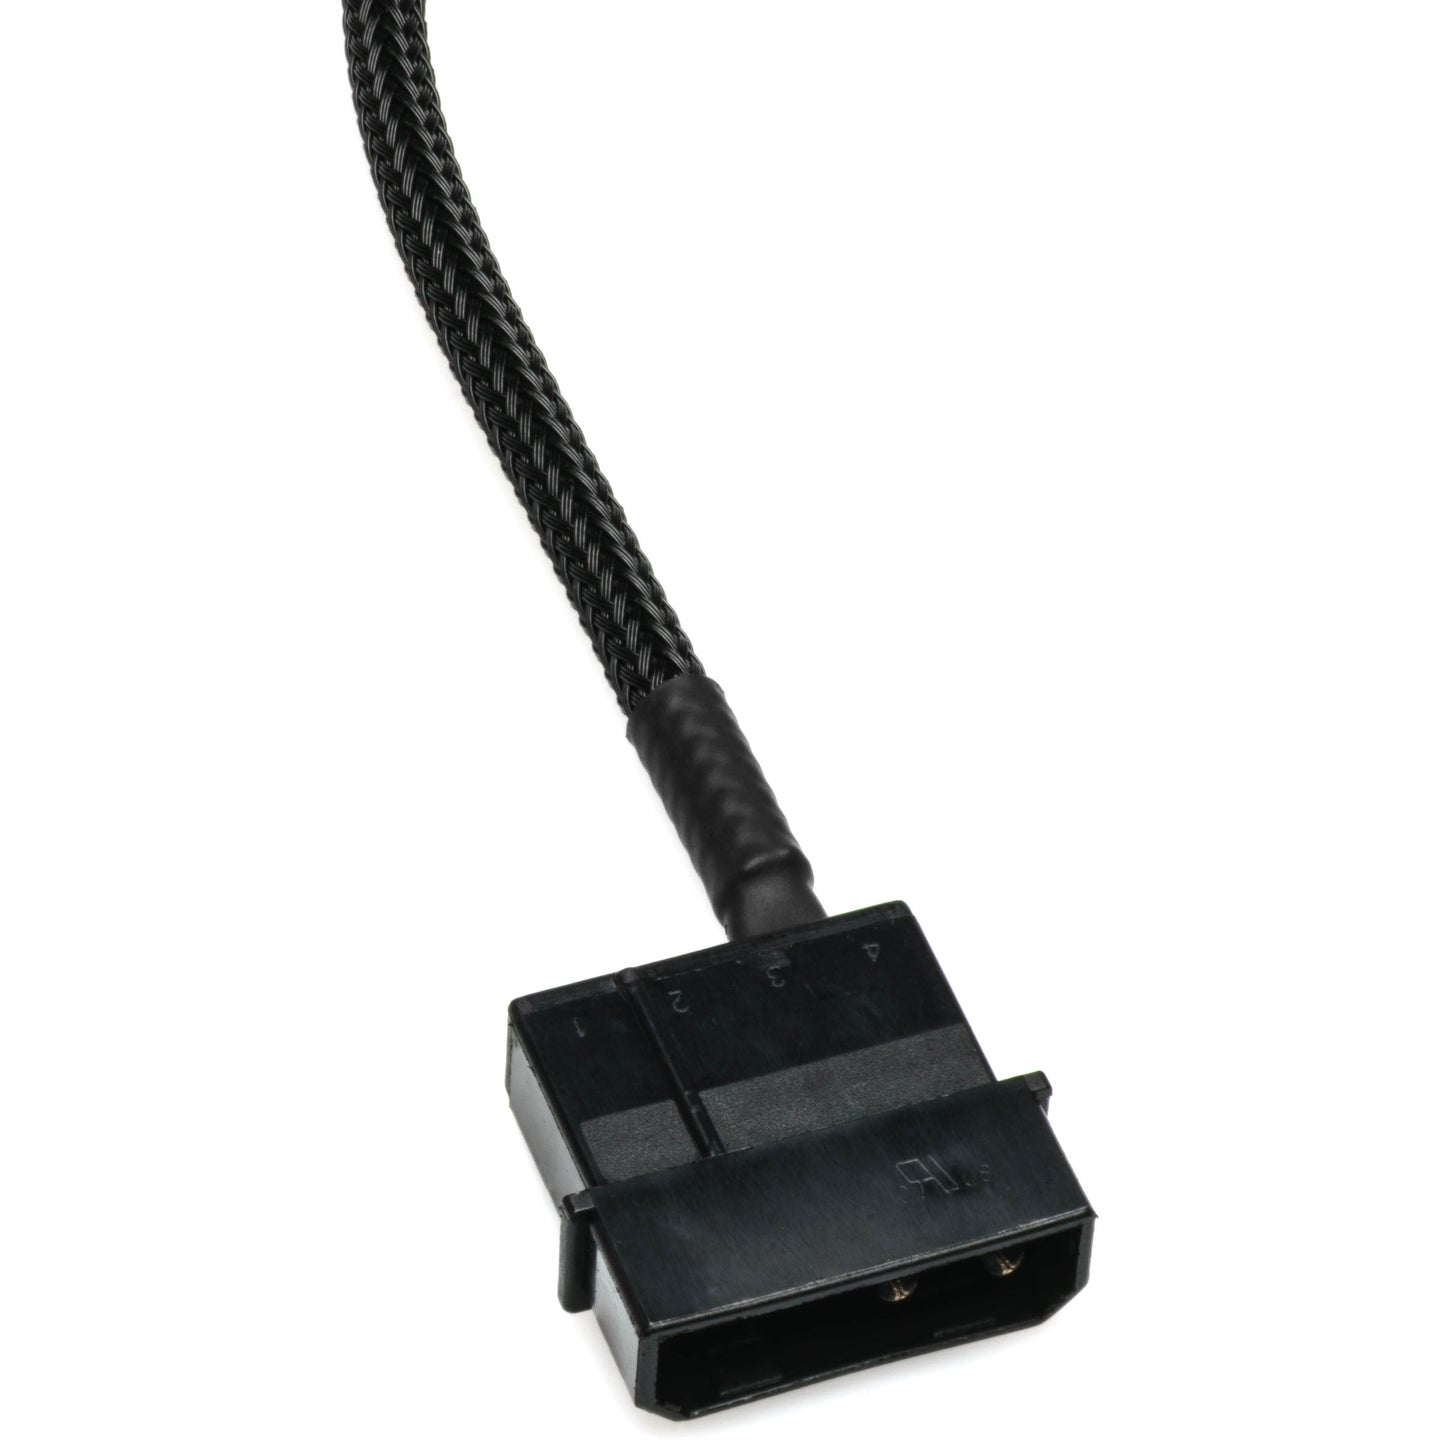 4-Pin Molex to Female USB 5V Power Adapter Cable